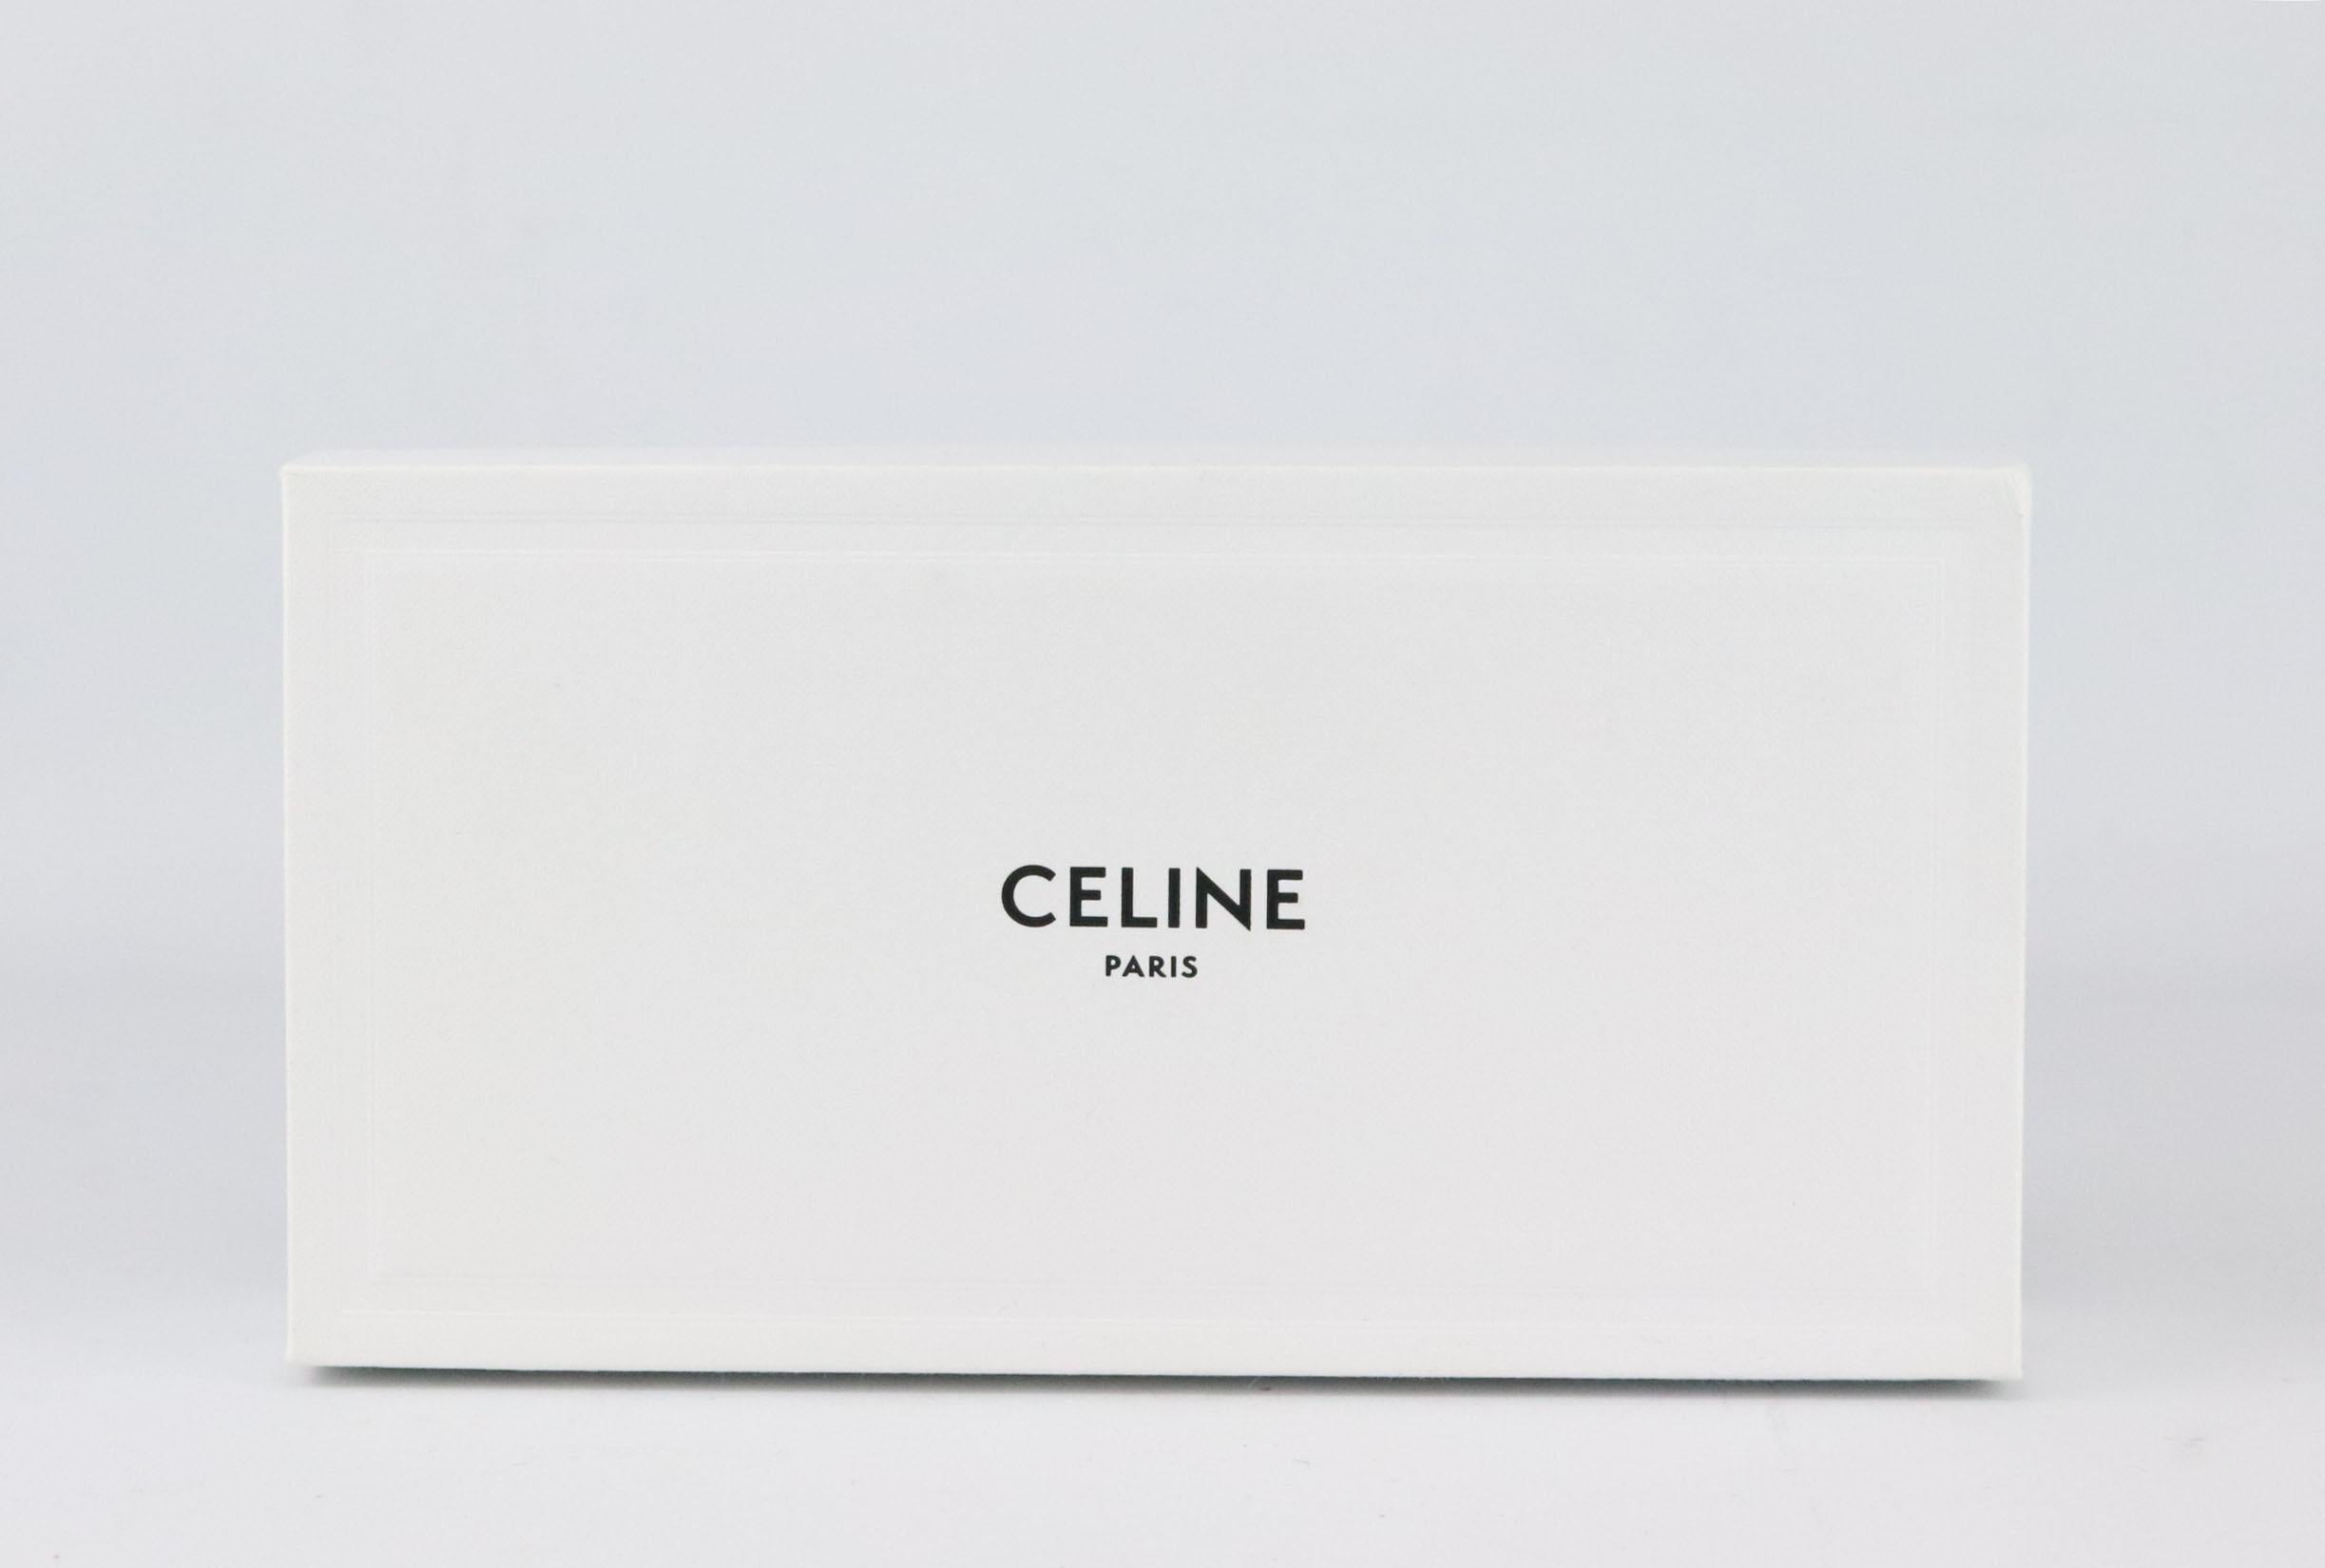 Celine's sunglasses have been made in Italy from lightweight yet durable light-brown tortoiseshell acetate, cut in a square-frame silhouette that's flattering on most face shapes, they're fitted with mirrored lenses that provide 100% UV